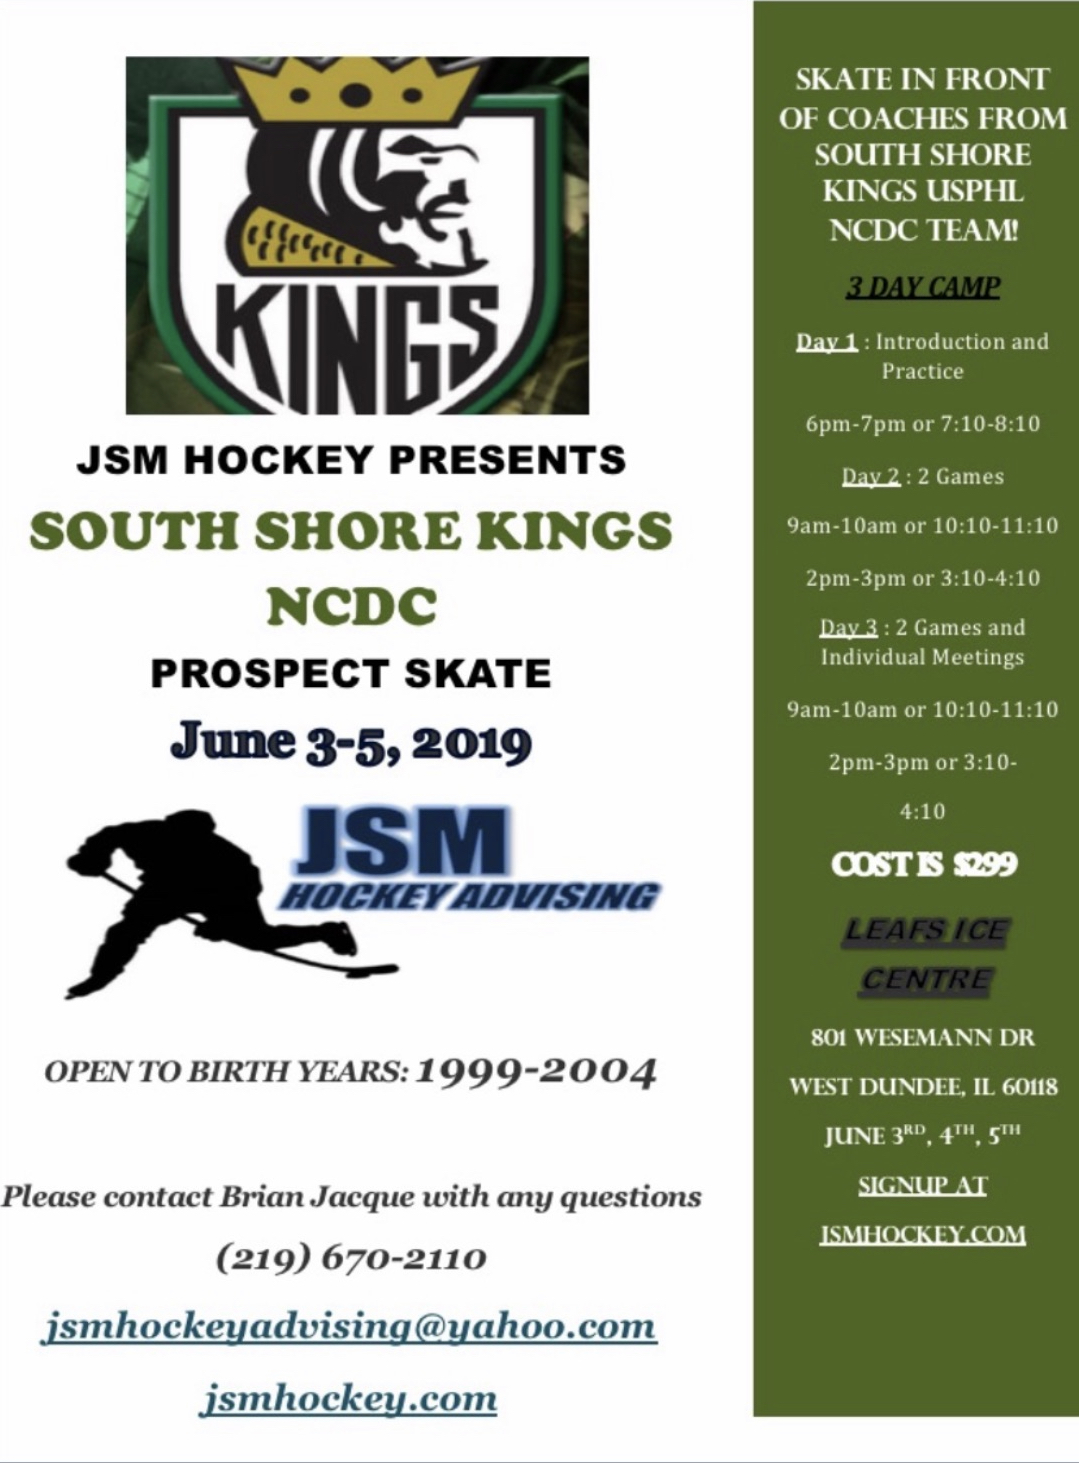 South Shore Kings NCDC Main Camp Registration Now Open!